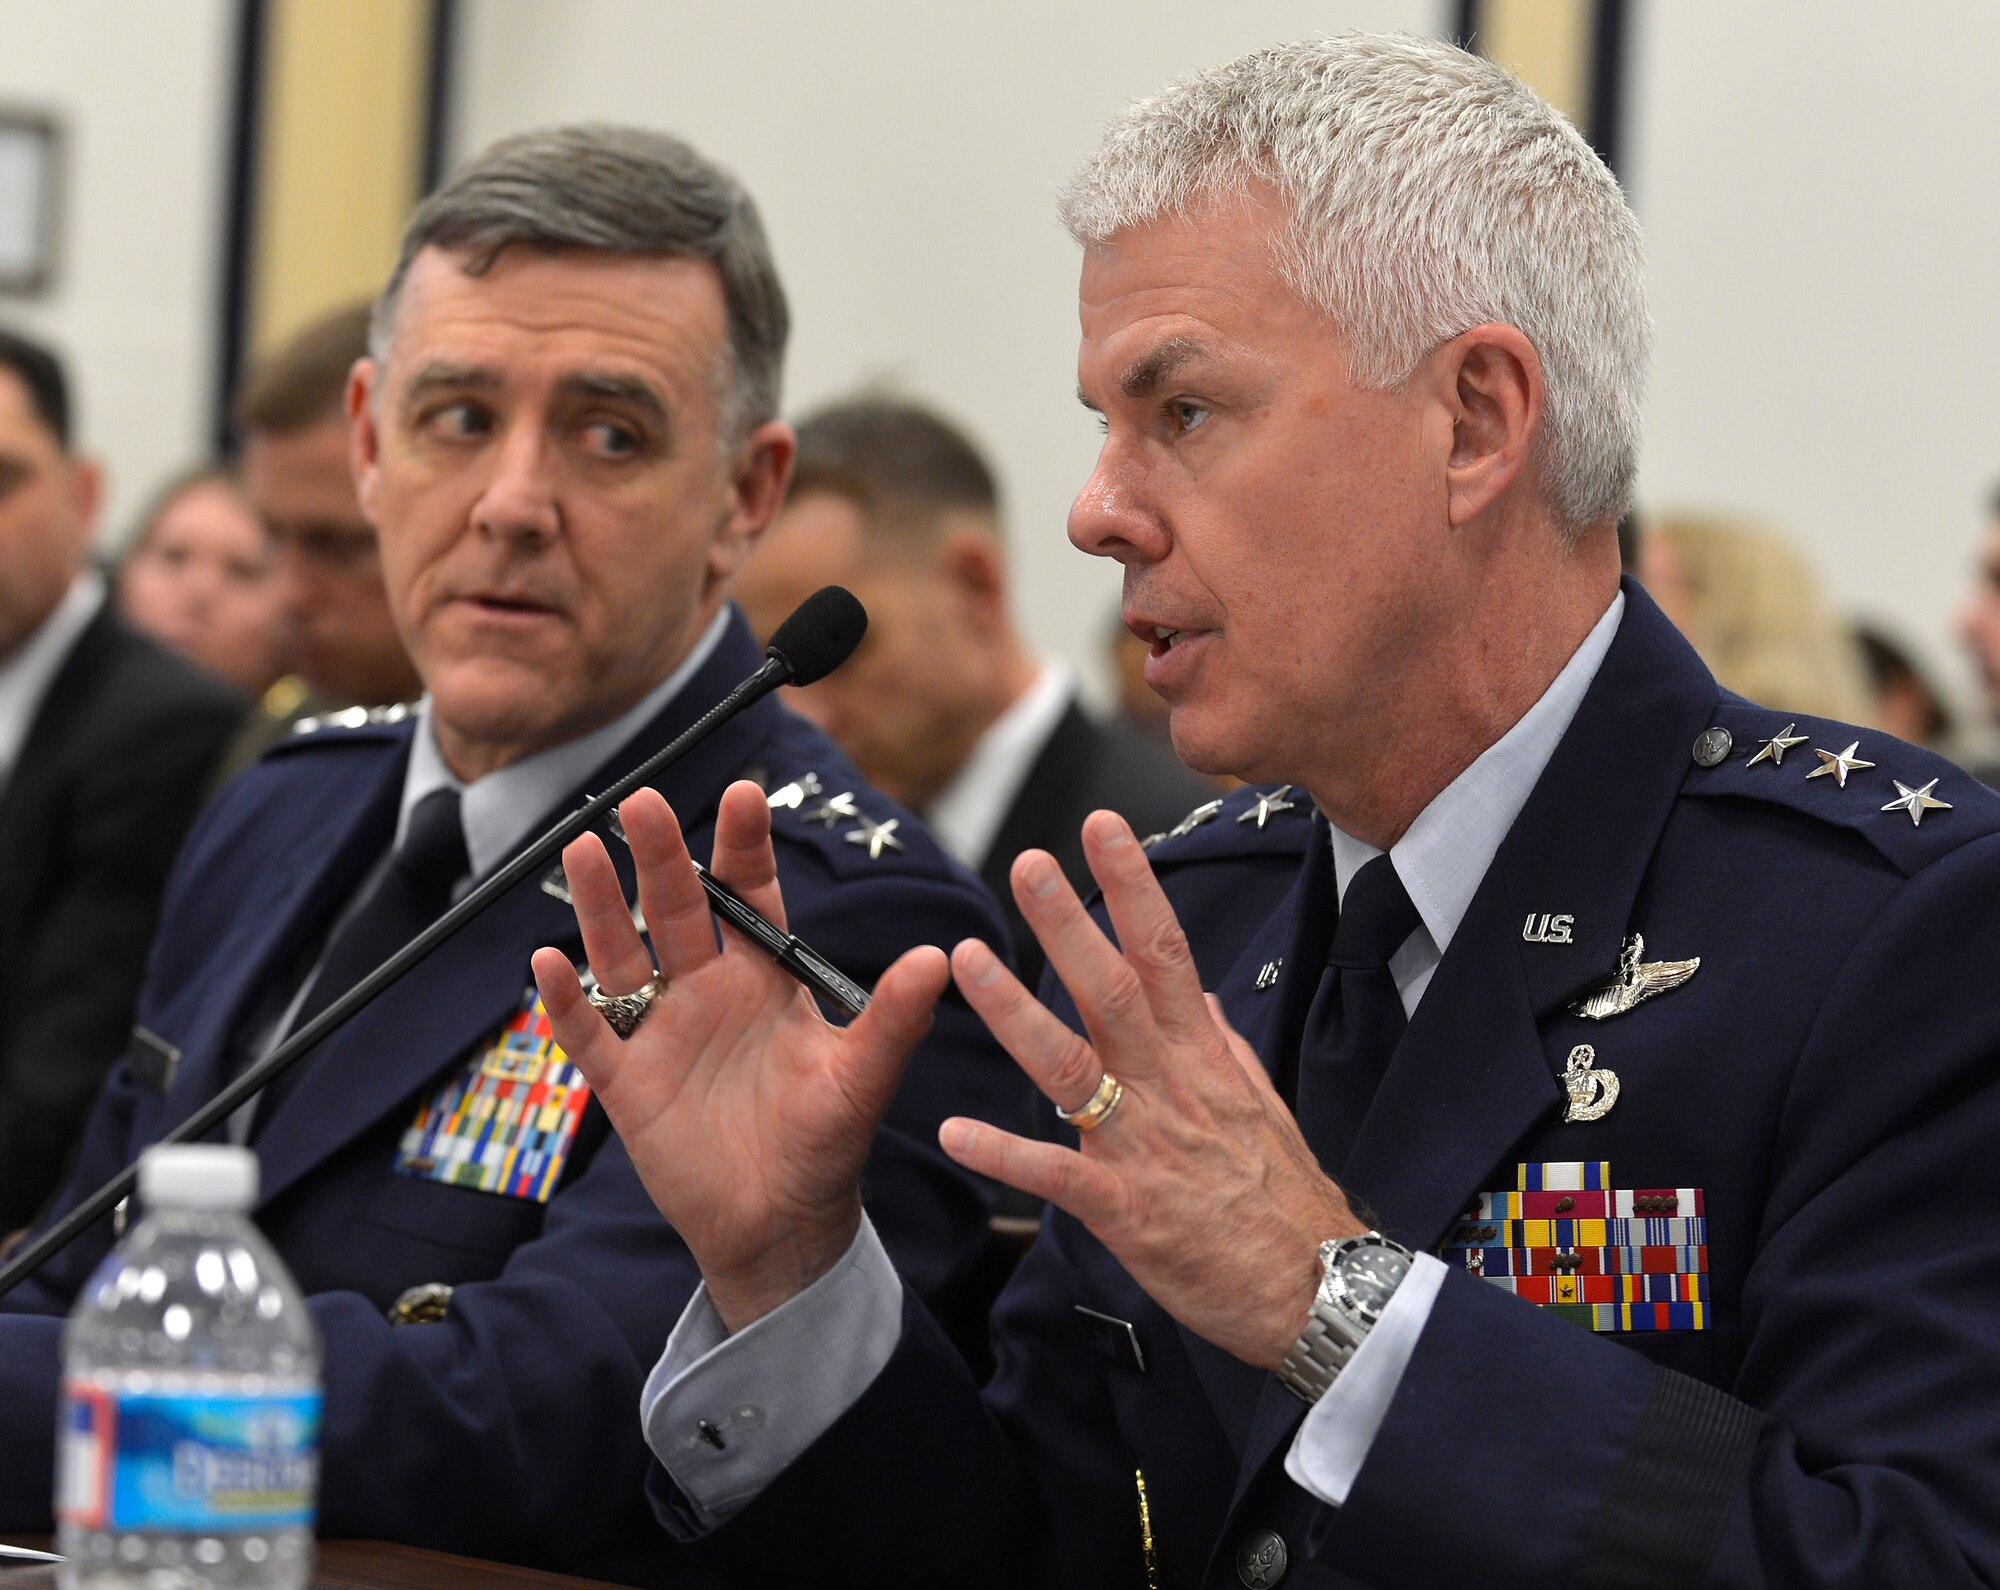 Air Force Lt. Gen. Burton Field looks on while U.S. Air Force Lt. Gen. Charles Davis answers a question posed to him about combat aviation programs being budgeted for fiscal year 2014 during a hearing of the House Armed Services Committee's Tactical Air and Land Forces Subcommittee on Capitol Hill, Washington, D.C., April 17, 2013. Davis is the Military Deputy, Office of the Assistant Secretary of the Air Force for Acquisition. He is responsible for research and development, test, production and modernization of Air Force programs. Field is deputy chief of staff for operations, plans and requirements and also serves as the Air Force operations deputy to the Joint Chiefs of Staff. . (U.S. Air Force photo/Jim Varhegyi)